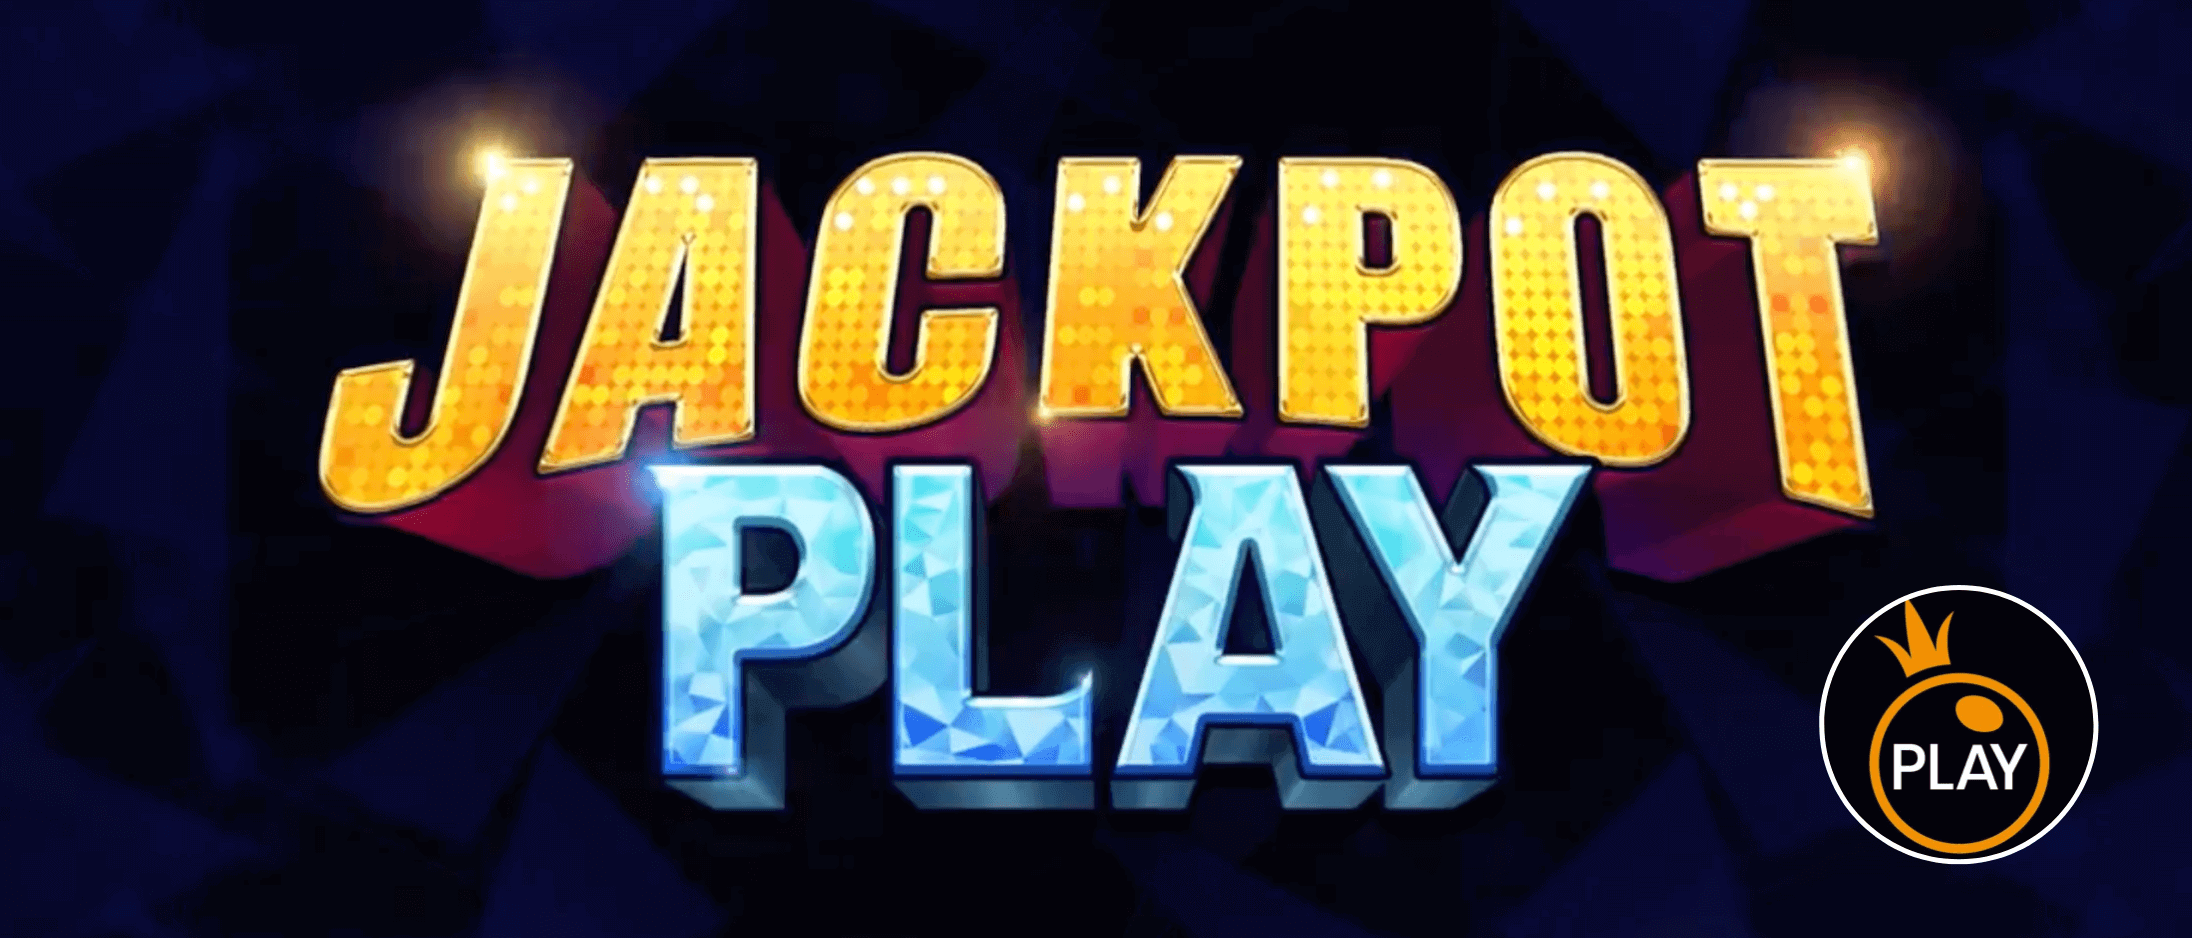 Pragmatic Play’s Jackpot Play feature launched